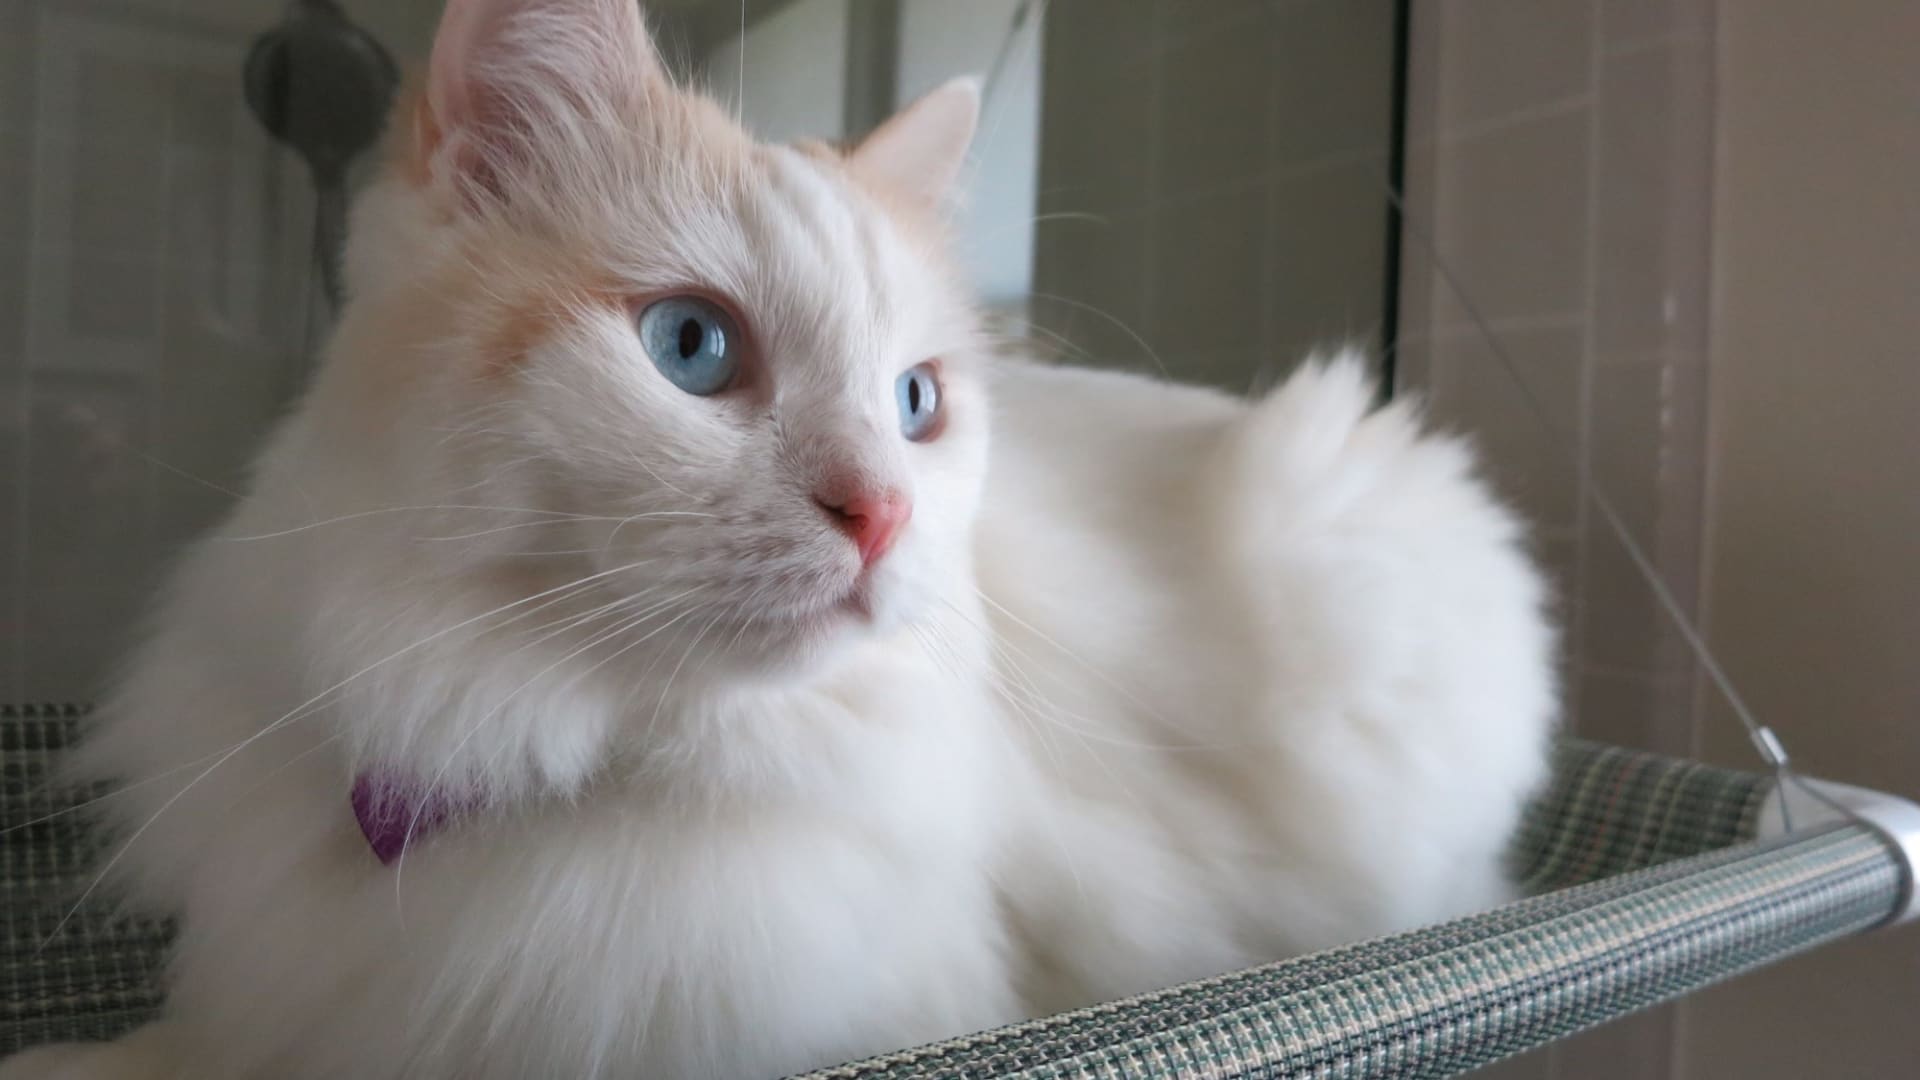 Kelly Anderson said her first cat, Chai, died suddenly after complications from surgery.